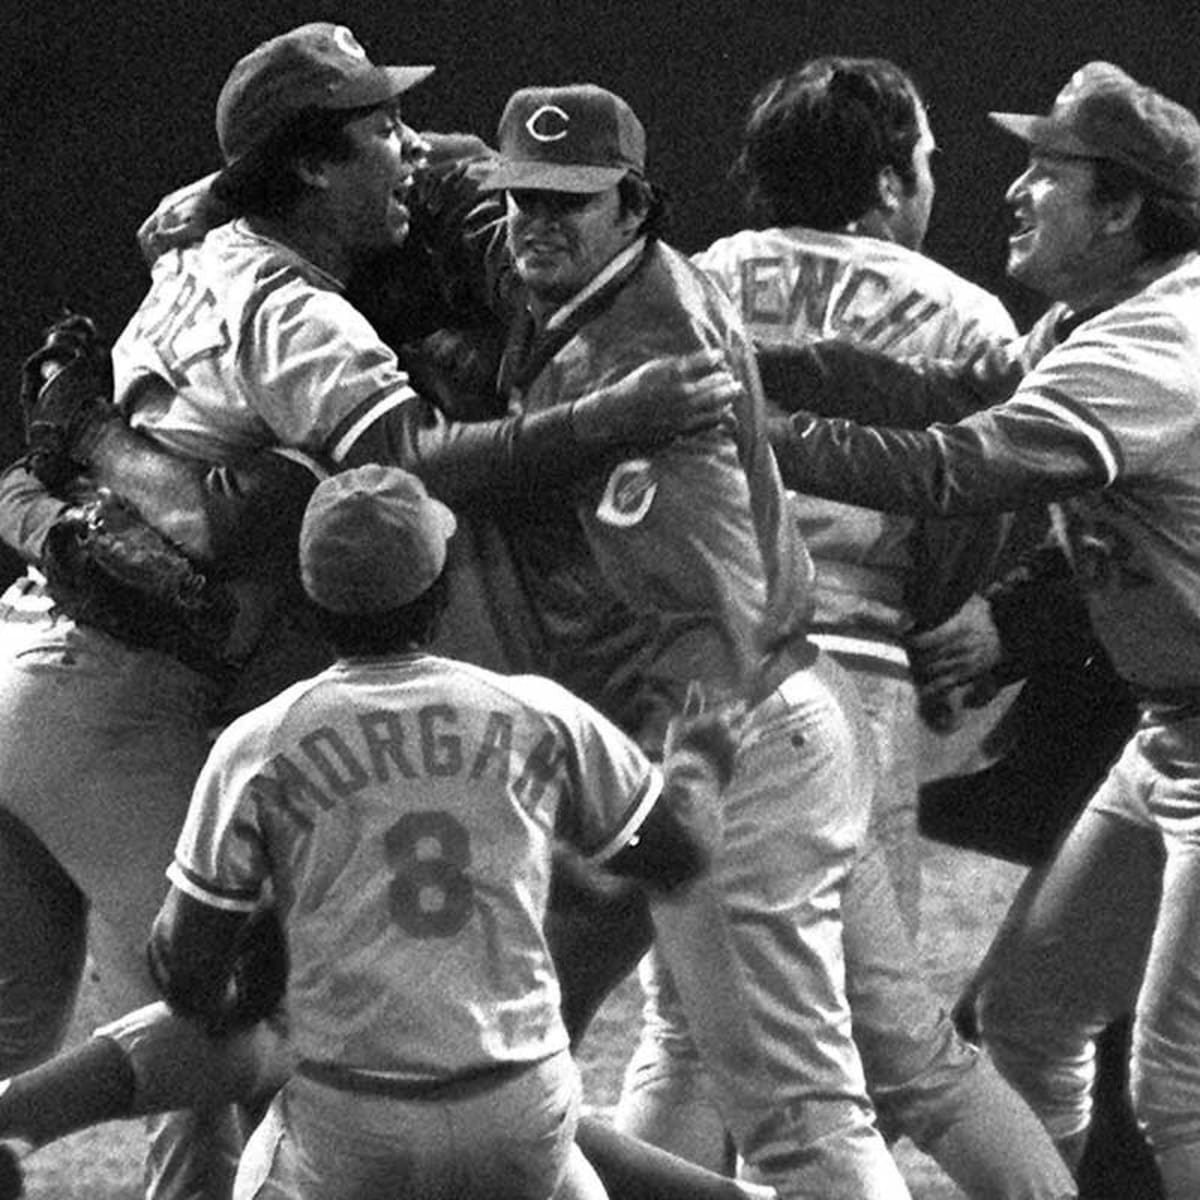 1975 World Series, Game 6: Reds @ Red Sox 